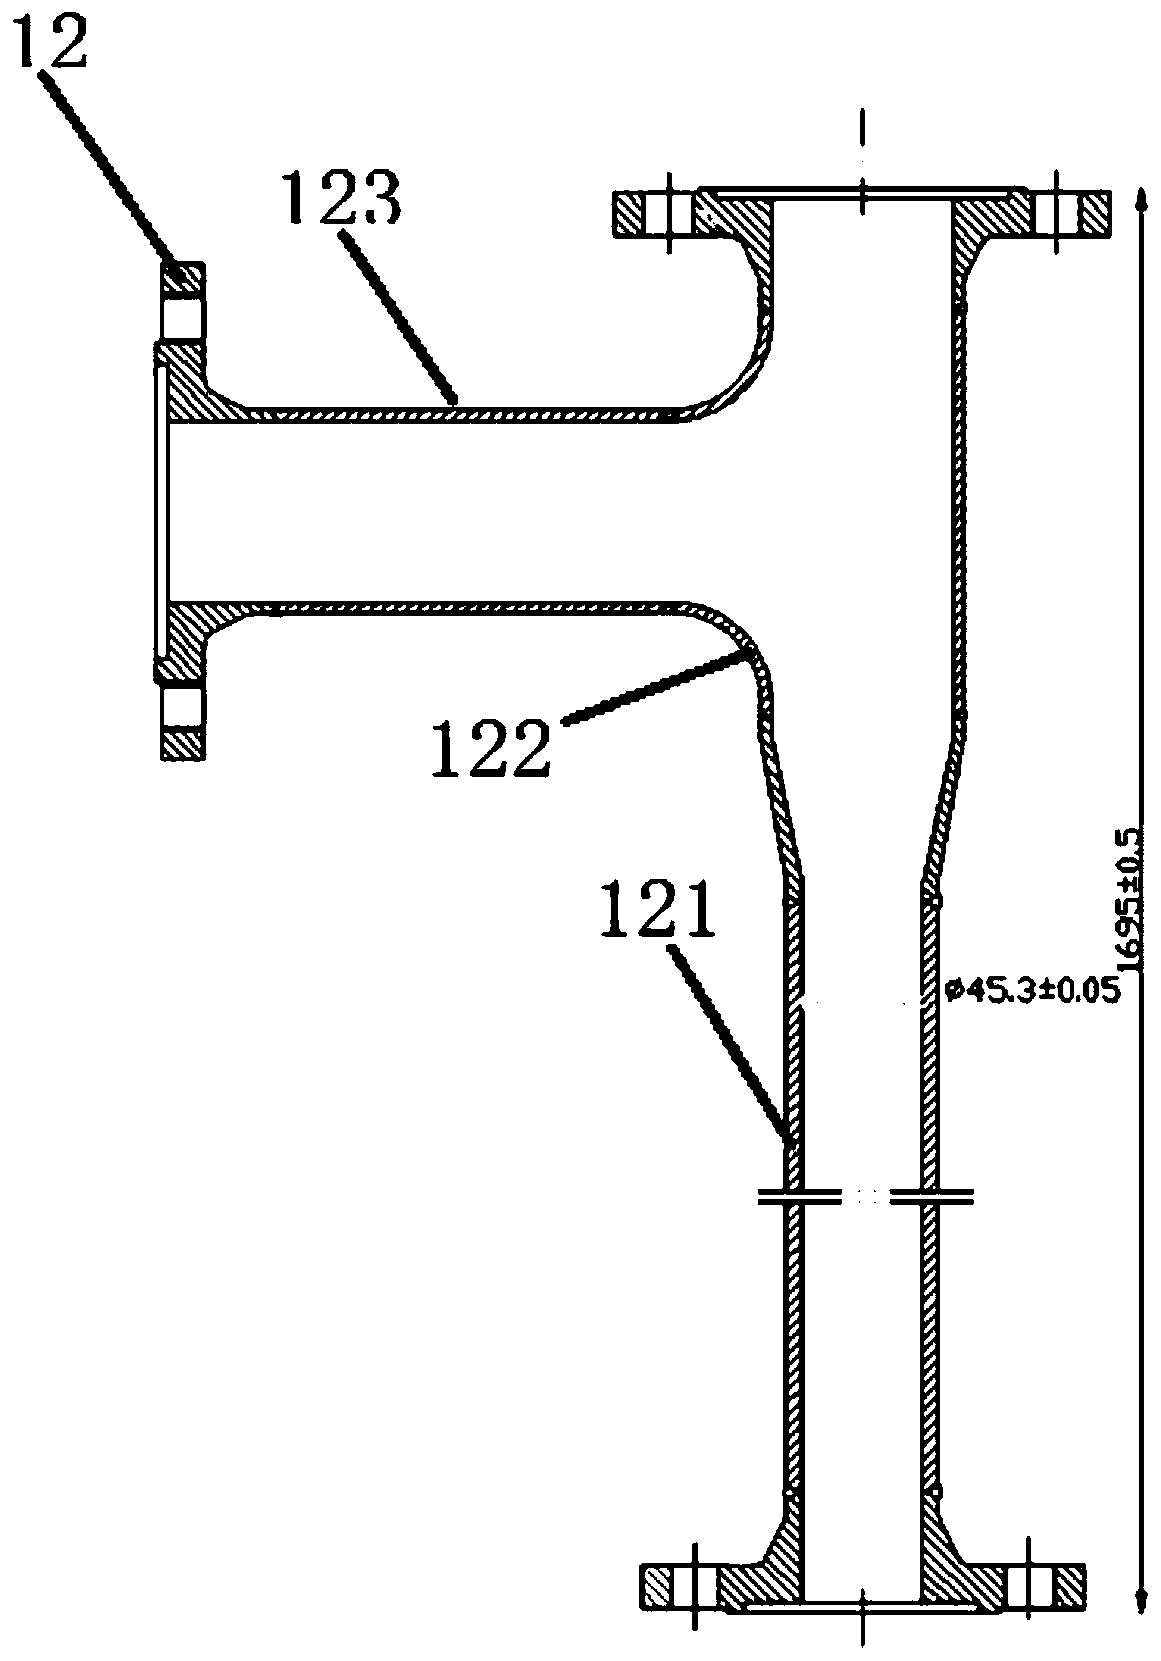 High-power thick rod fuel element simulation device